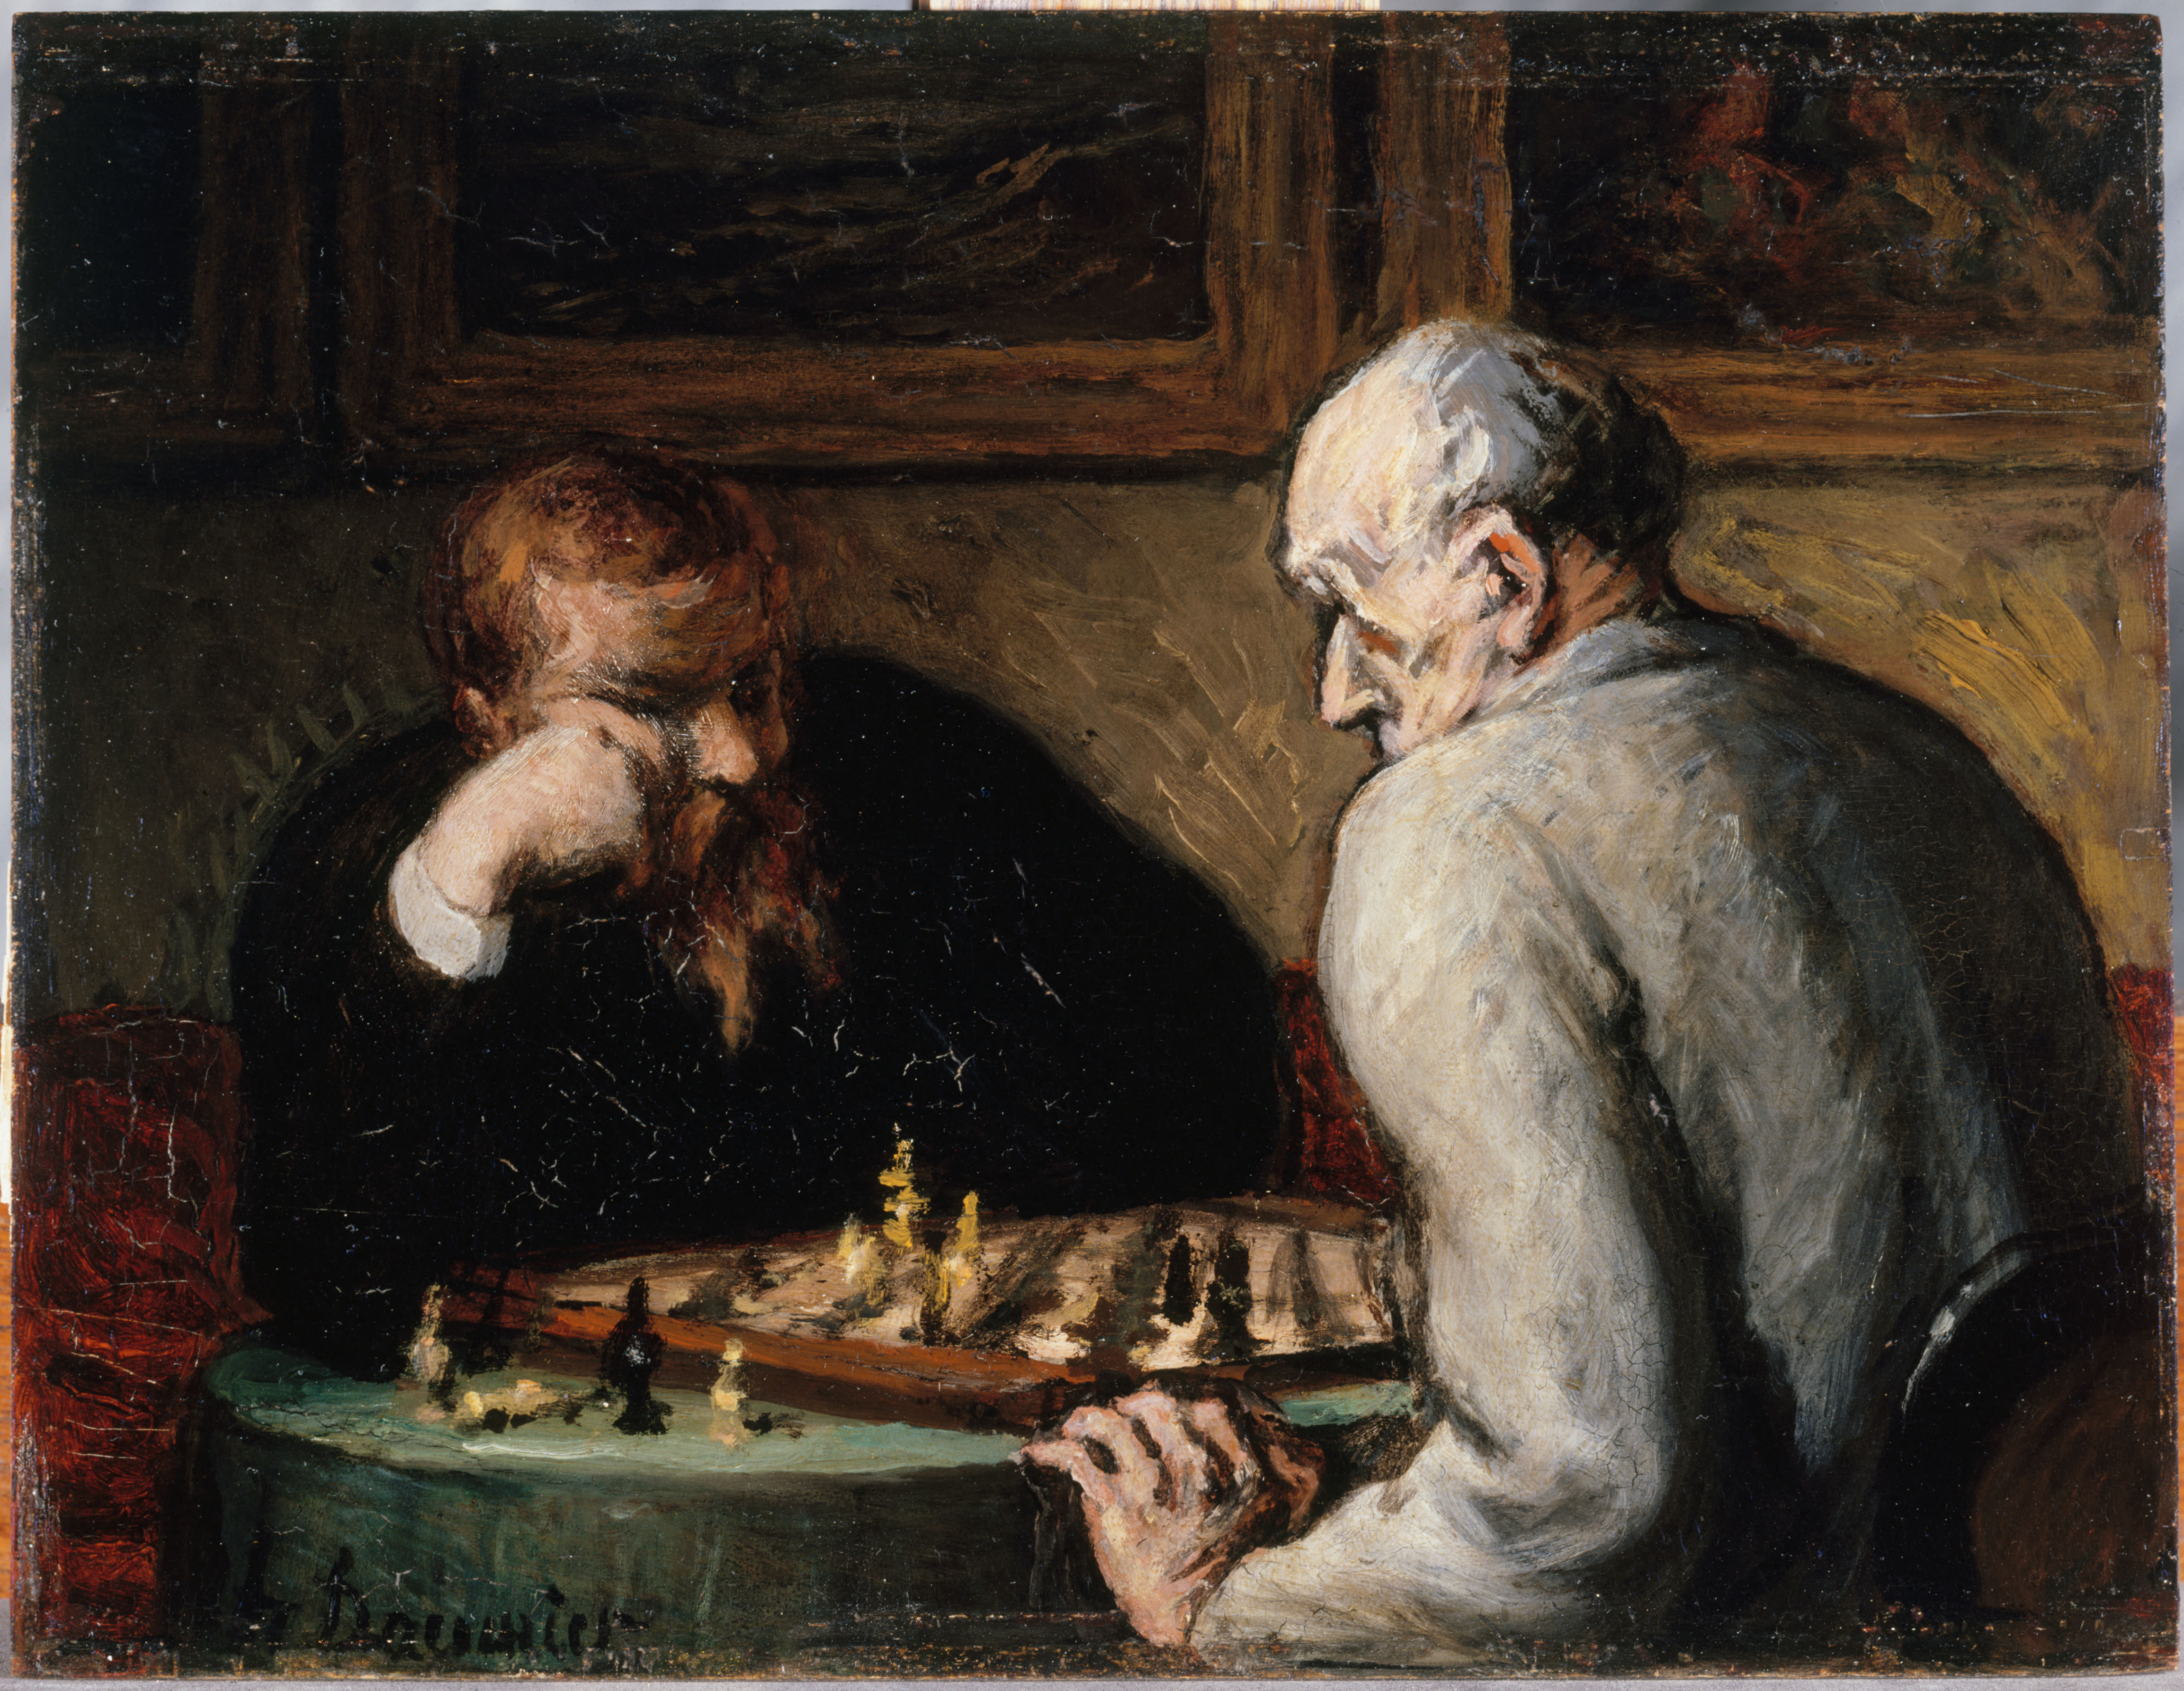 Honore Daumier (1808-1879), 1863 painting 